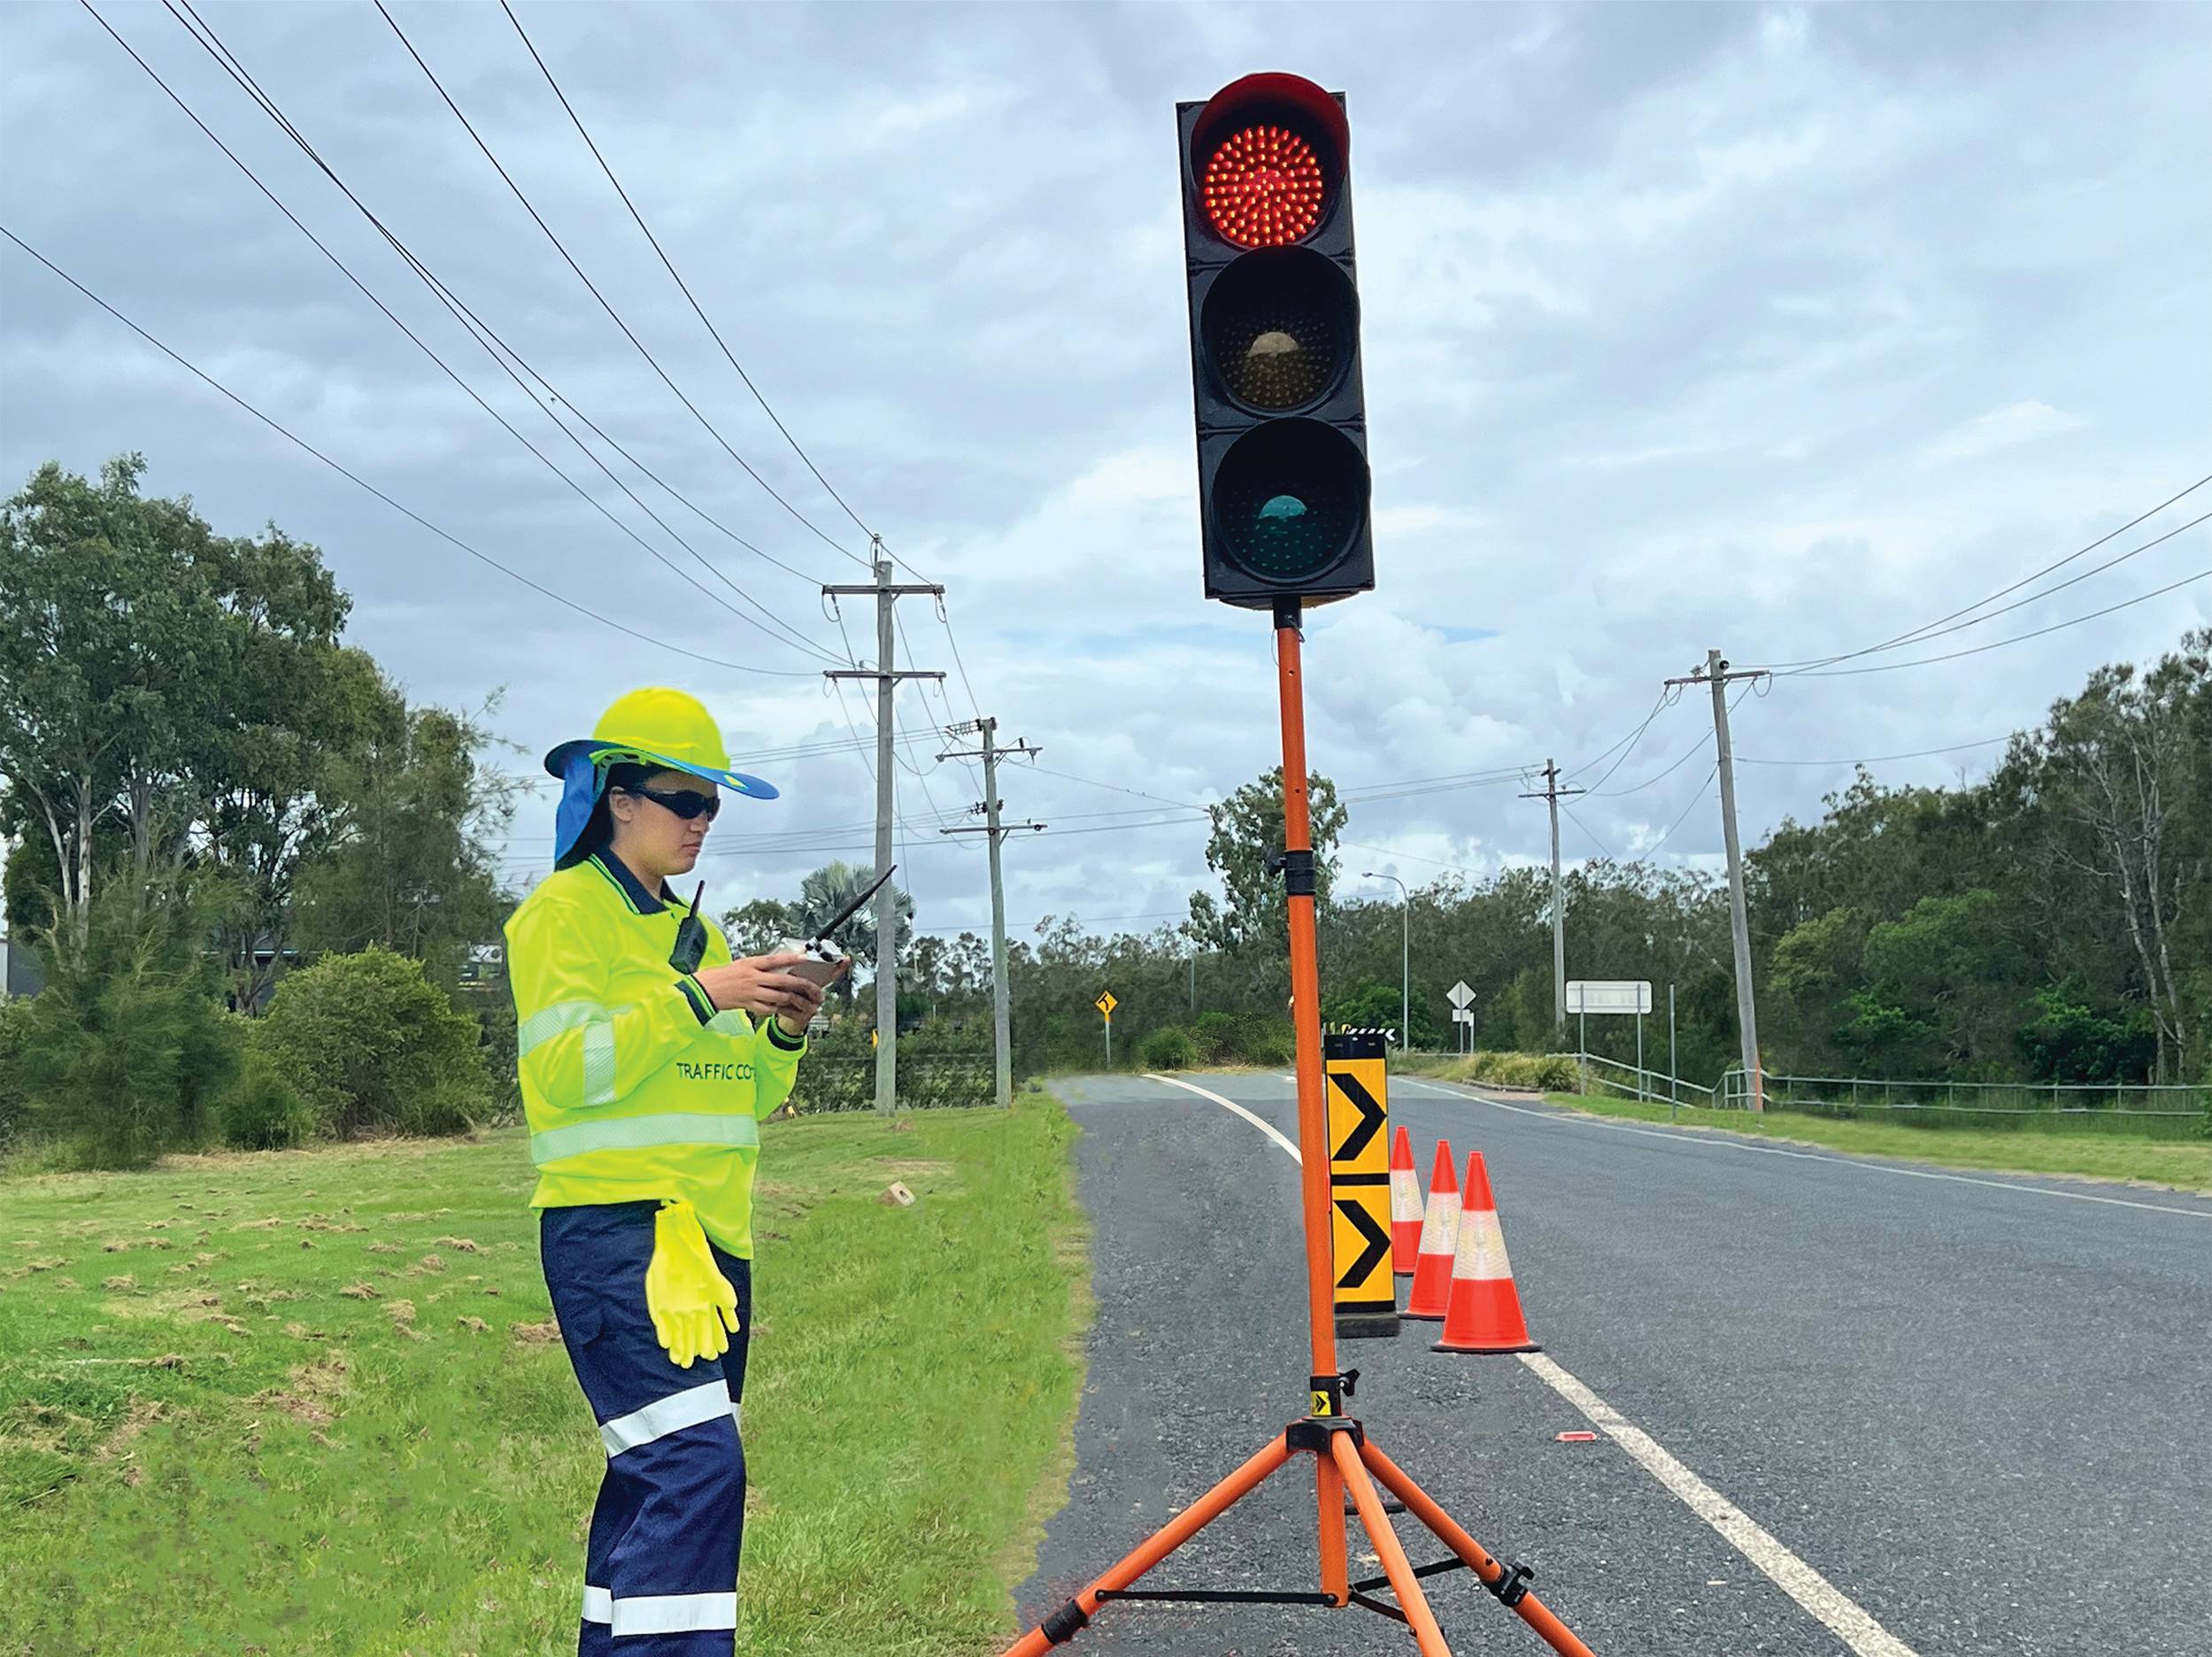 A traffic controller in high visibility clothing uses a remote to operate a portable traffic light on a rural road.